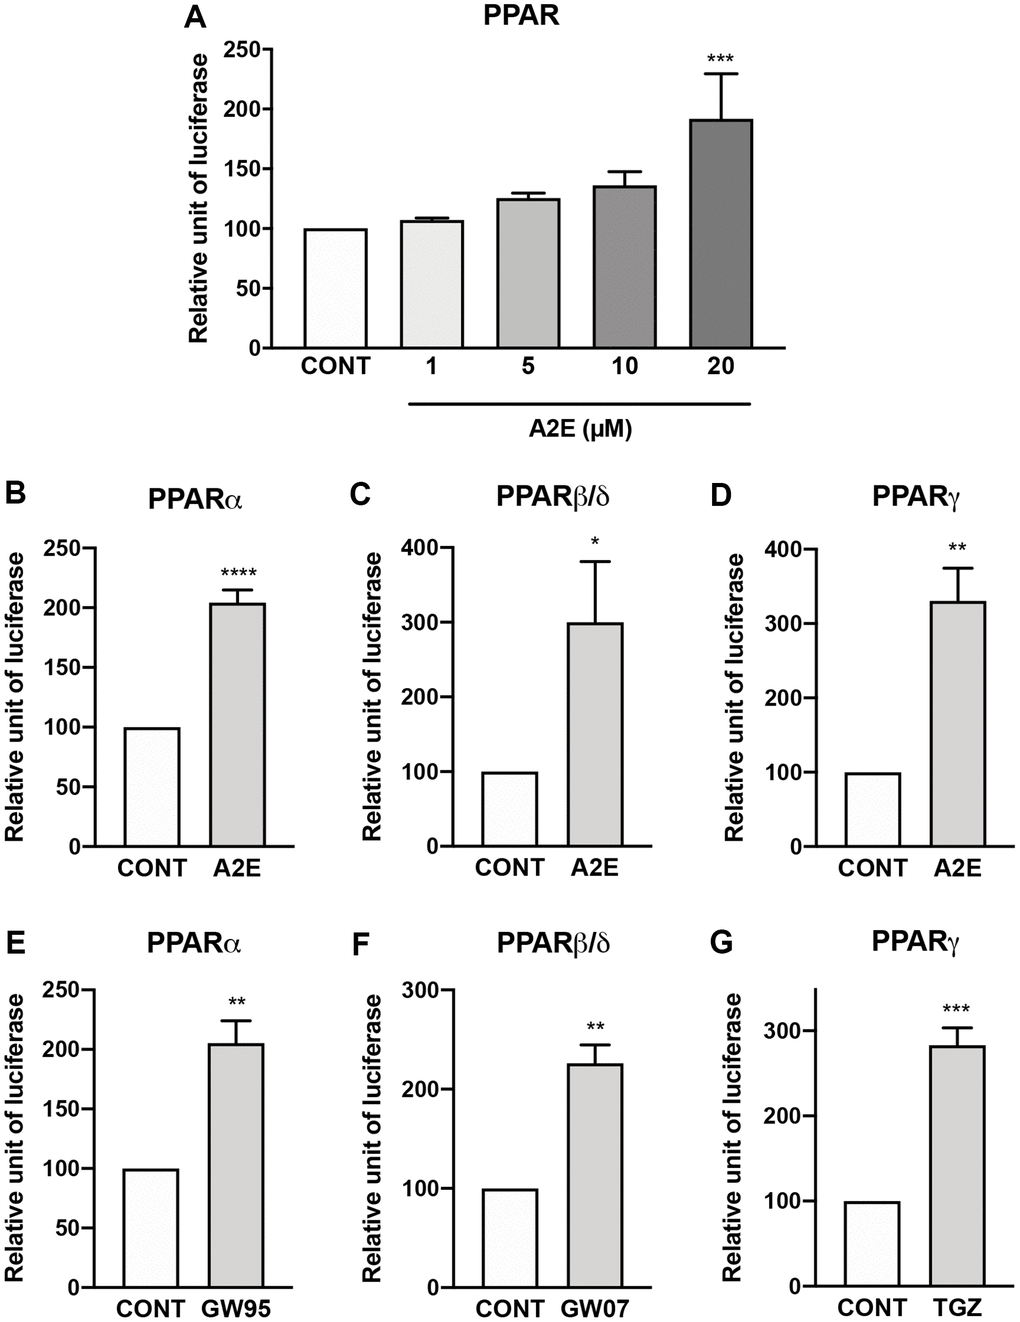 A2E induces the transactivation of all PPAR isoforms. Effect of increasing concentration of A2E on endogenous PPAR transactivation (A). Effect of A2E (20 μM) on the transactivation of over-expressed PPAR-α (B), PPAR β/δ (C) and PPAR-γ (D). Effect of selective PPAR agonists GW9578 (GW95, 20 μM), GW0742 (GW07, 30 μM) and troglitazone (TGZ, 20 μM) on the respective transactivation of over-expressed PPAR-α (E), PPAR β/δ (F) and PPAR-γ (G). Bars represent mean ± s.e.m. with n = 3–4. *p **p ***p ****p 